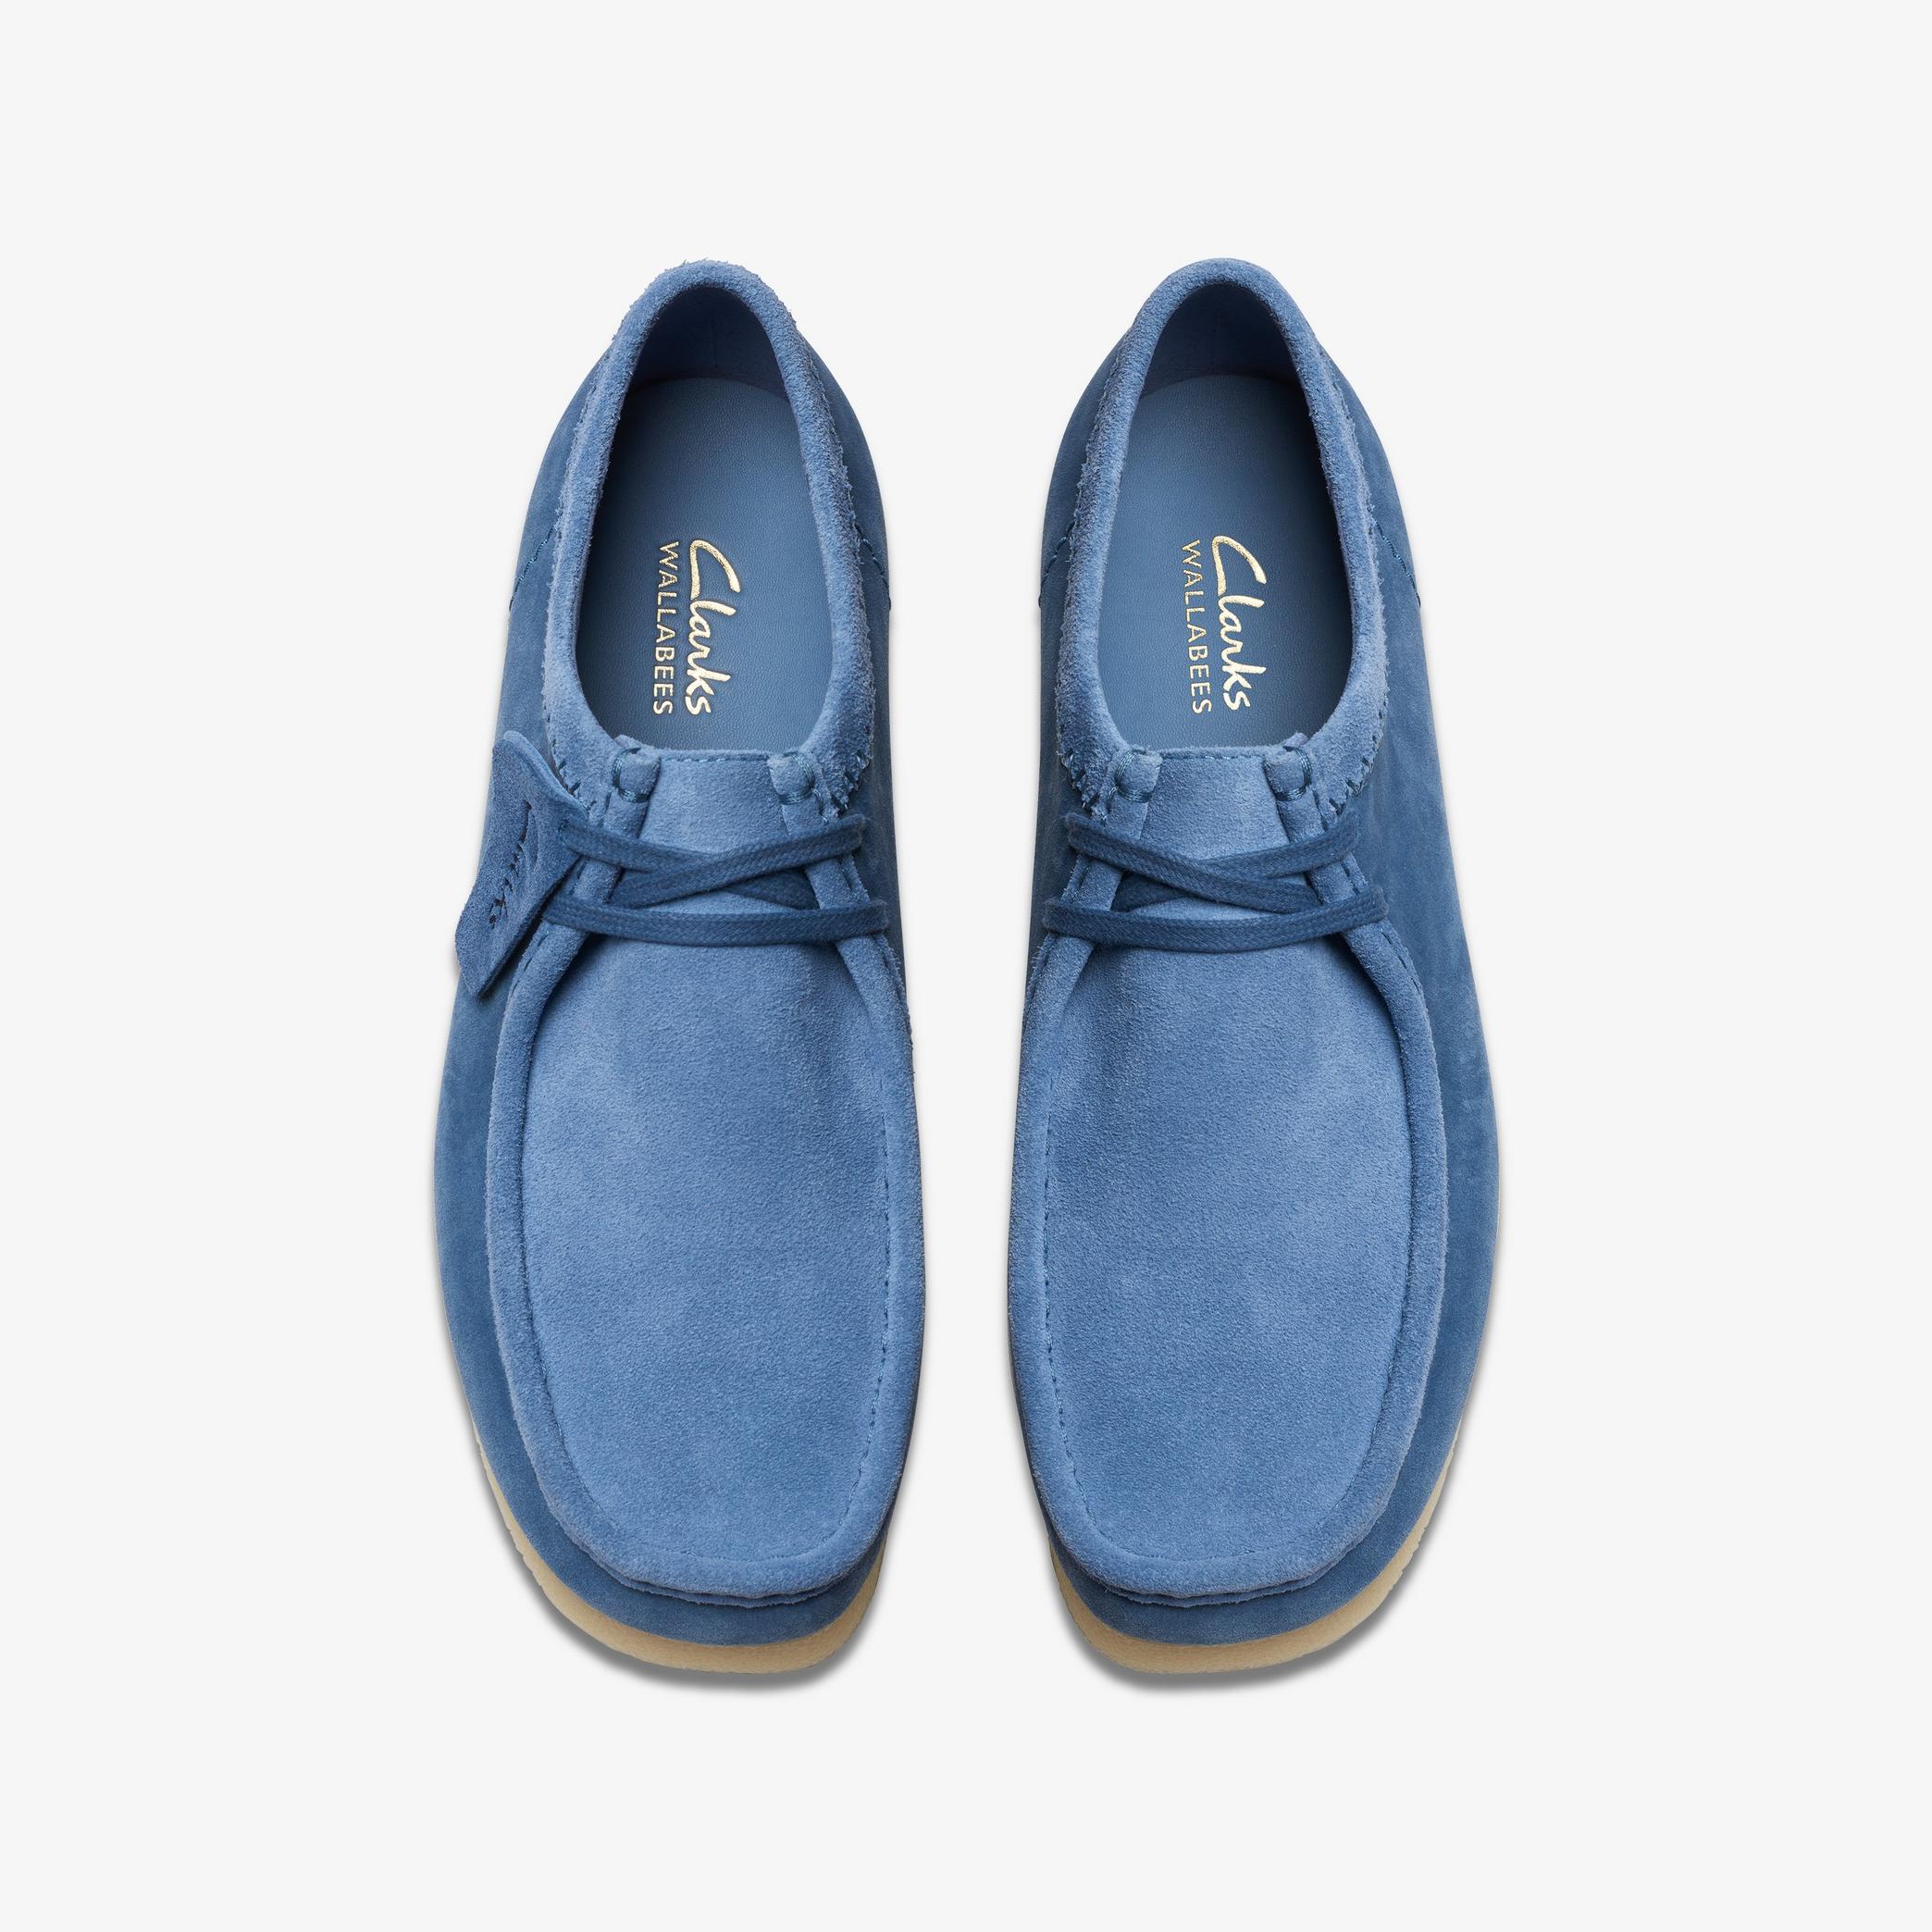 Wallabee EVO Blue Suede Moccasins, view 6 of 6